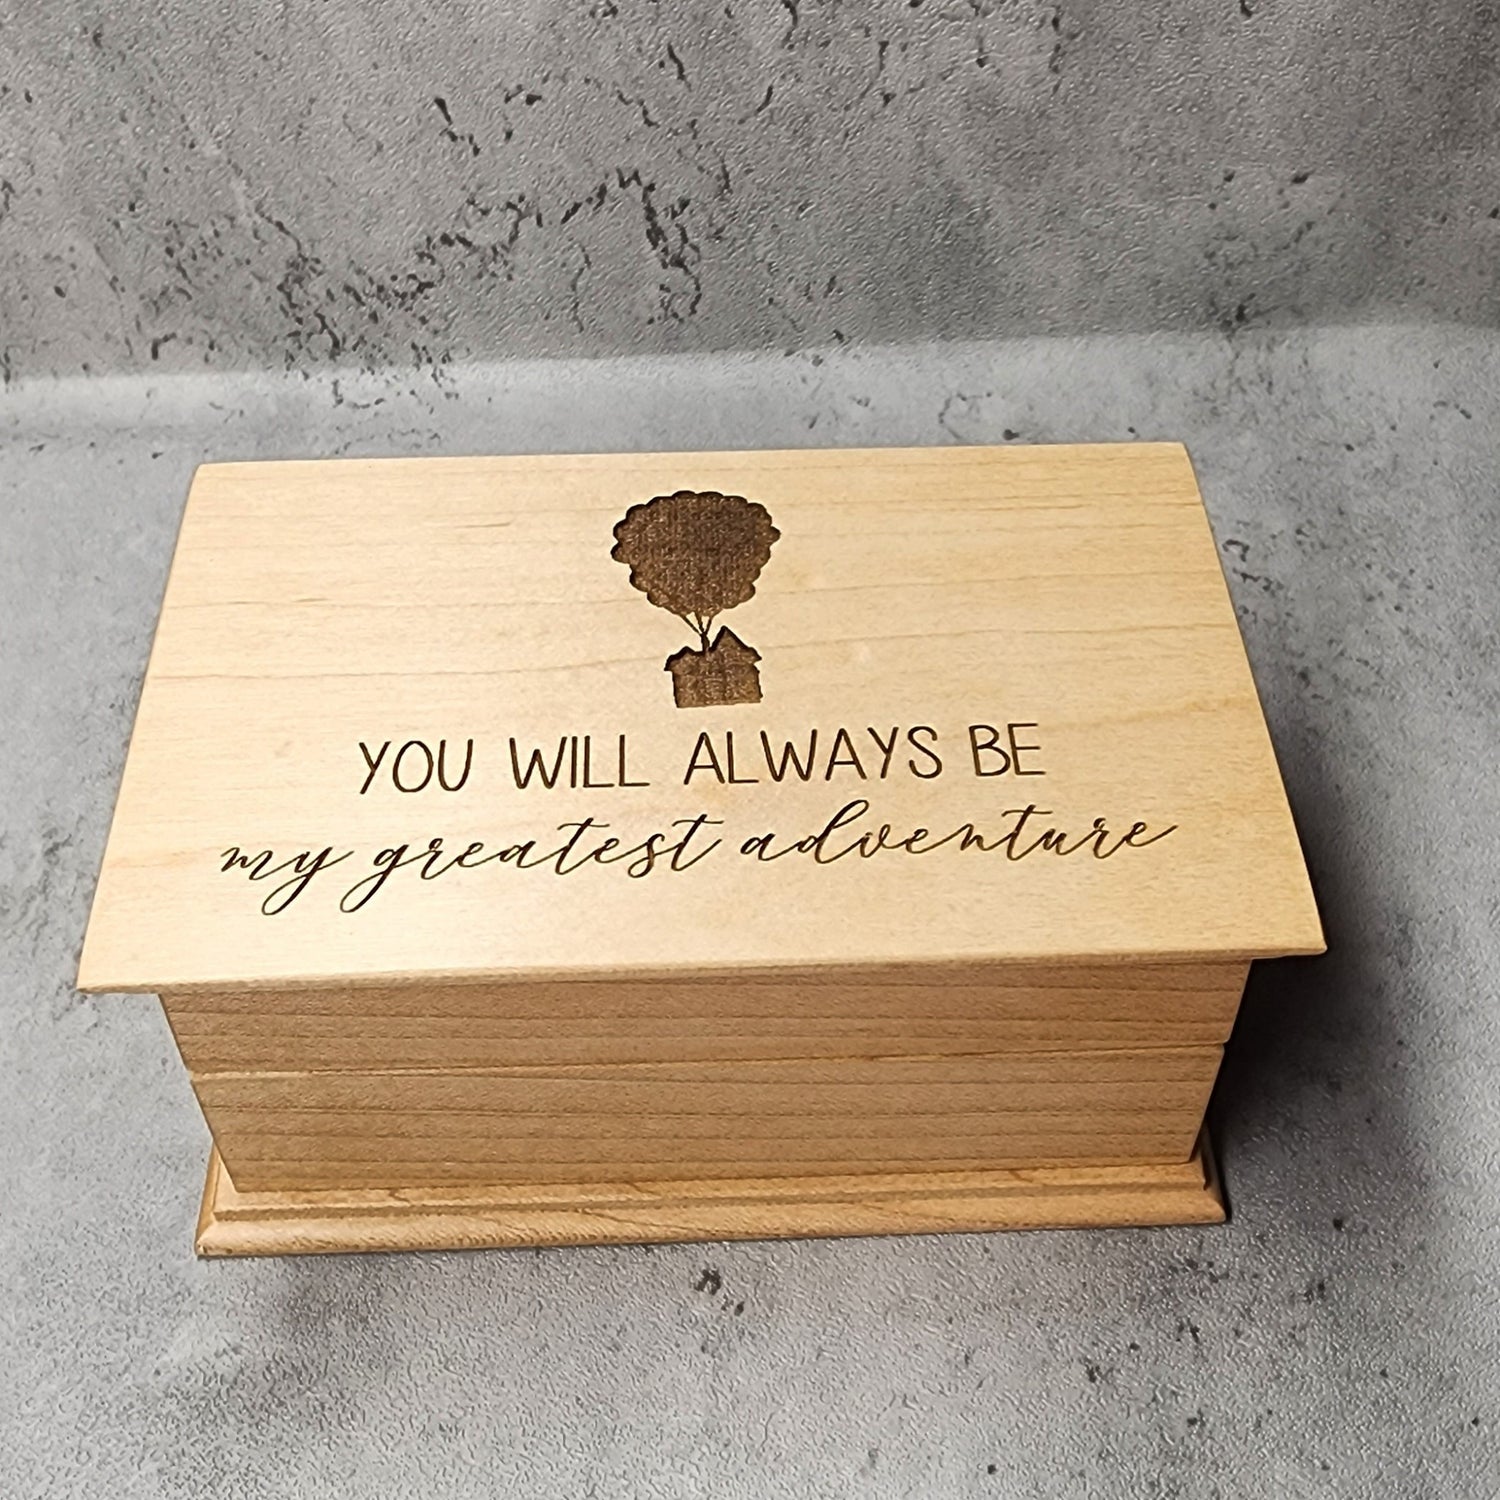 High quality jewelry box with music player built in, engraved with "You will always be my greatest adventure"